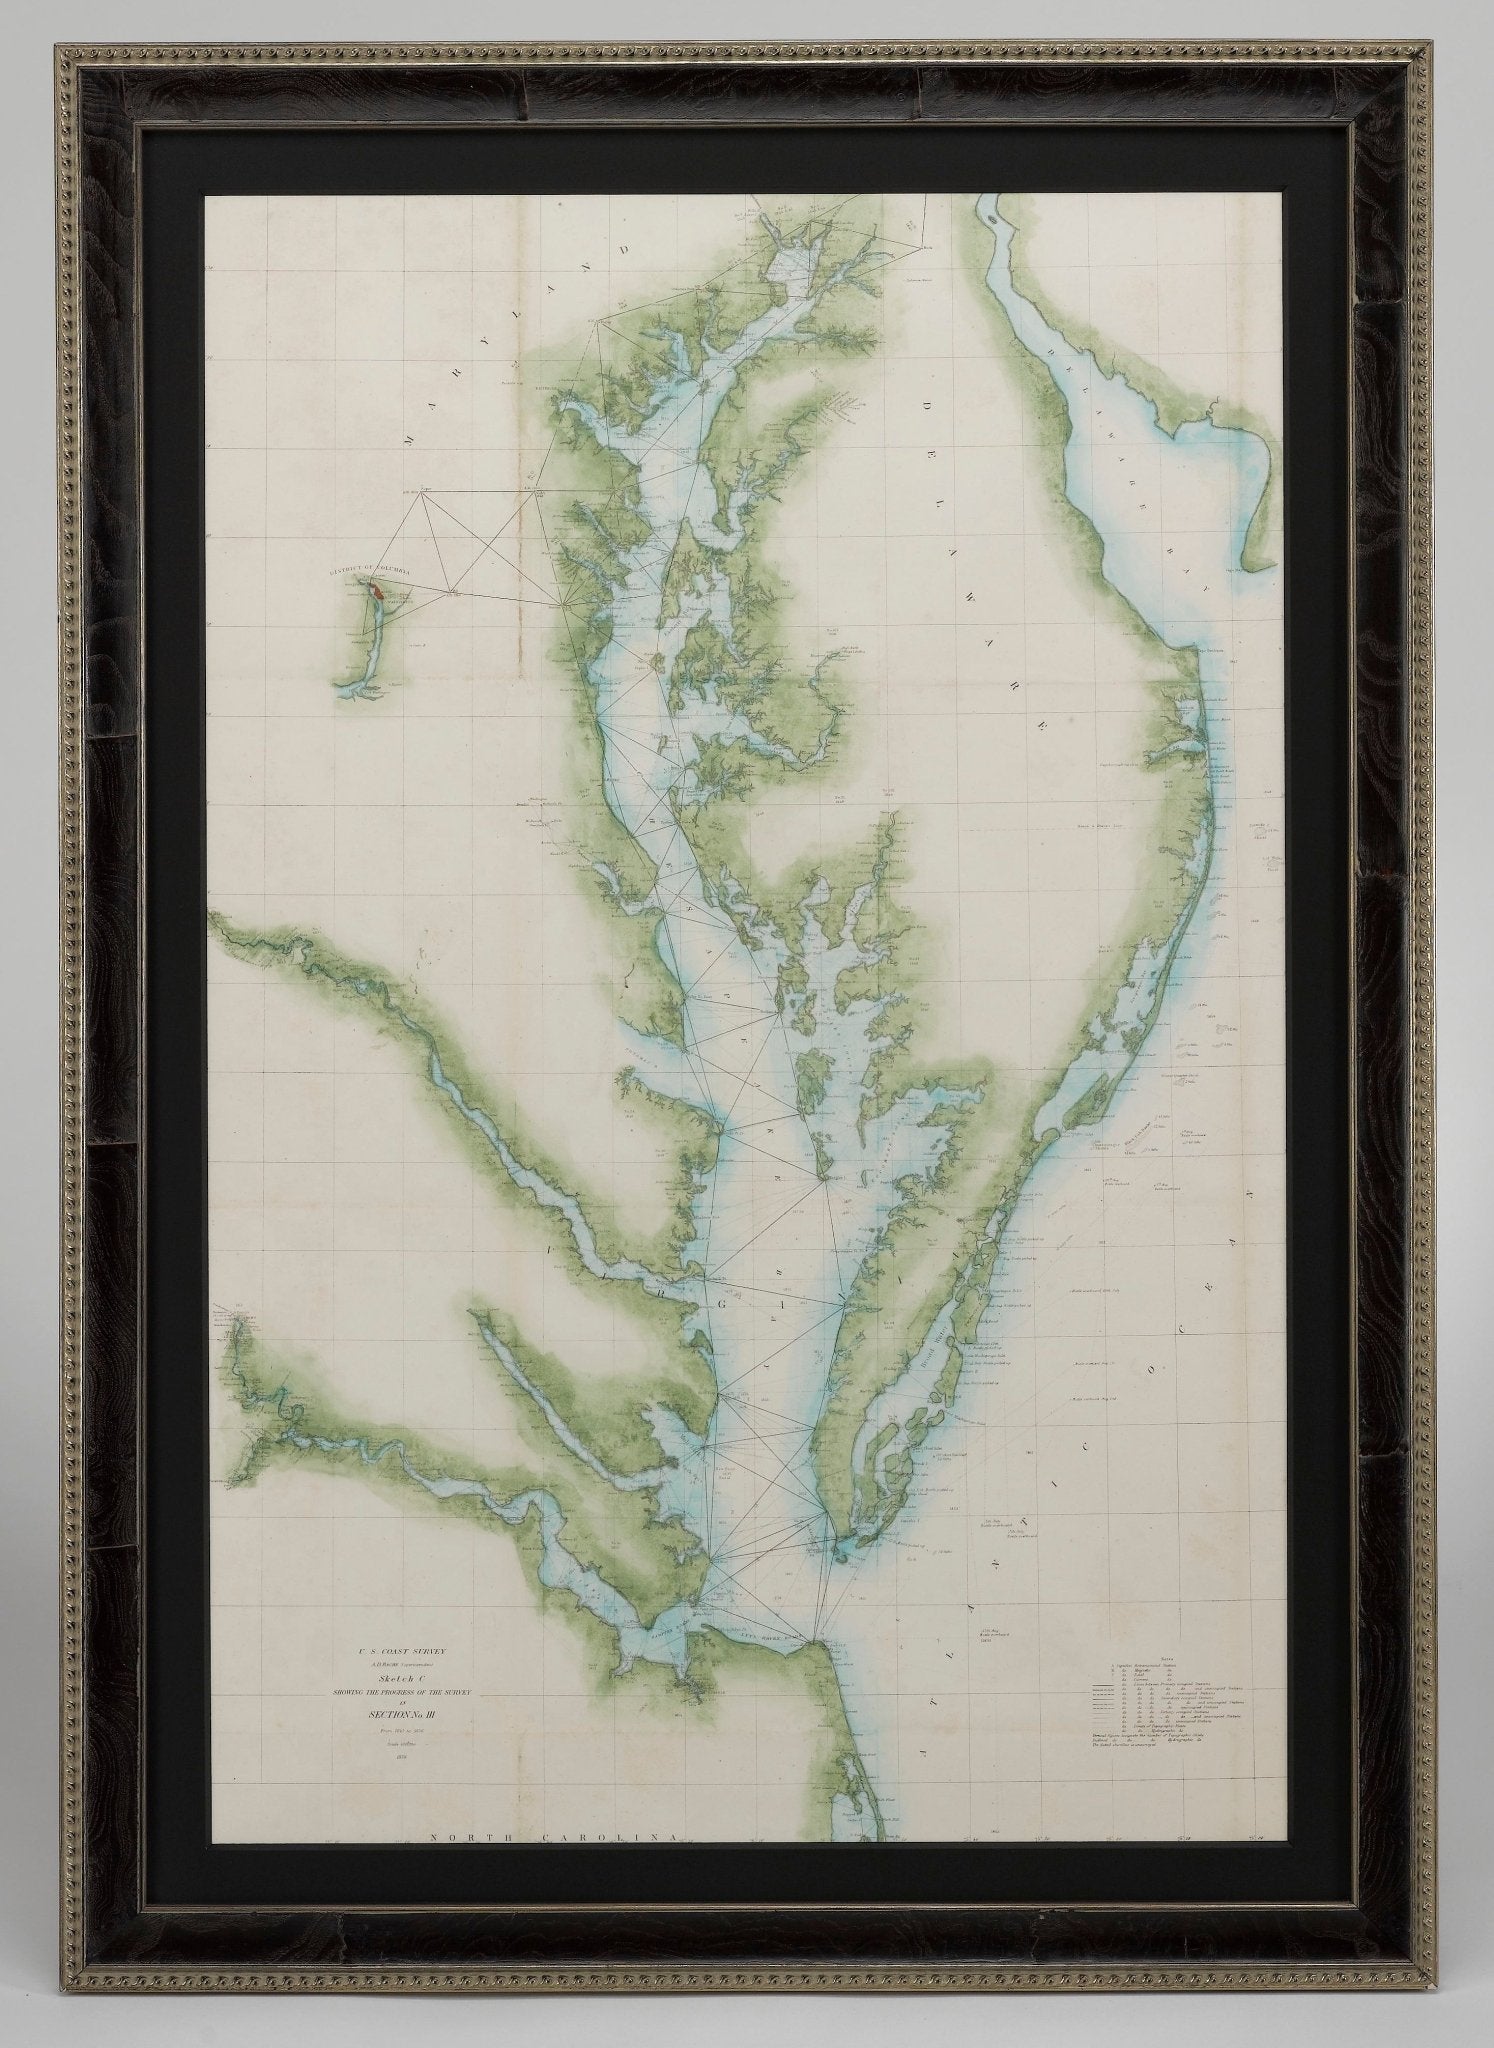 1856 "U.S. Coast Survey Map of Chesapeake Bay and Delaware Bay" by A. D. Bache. - The Great Republic